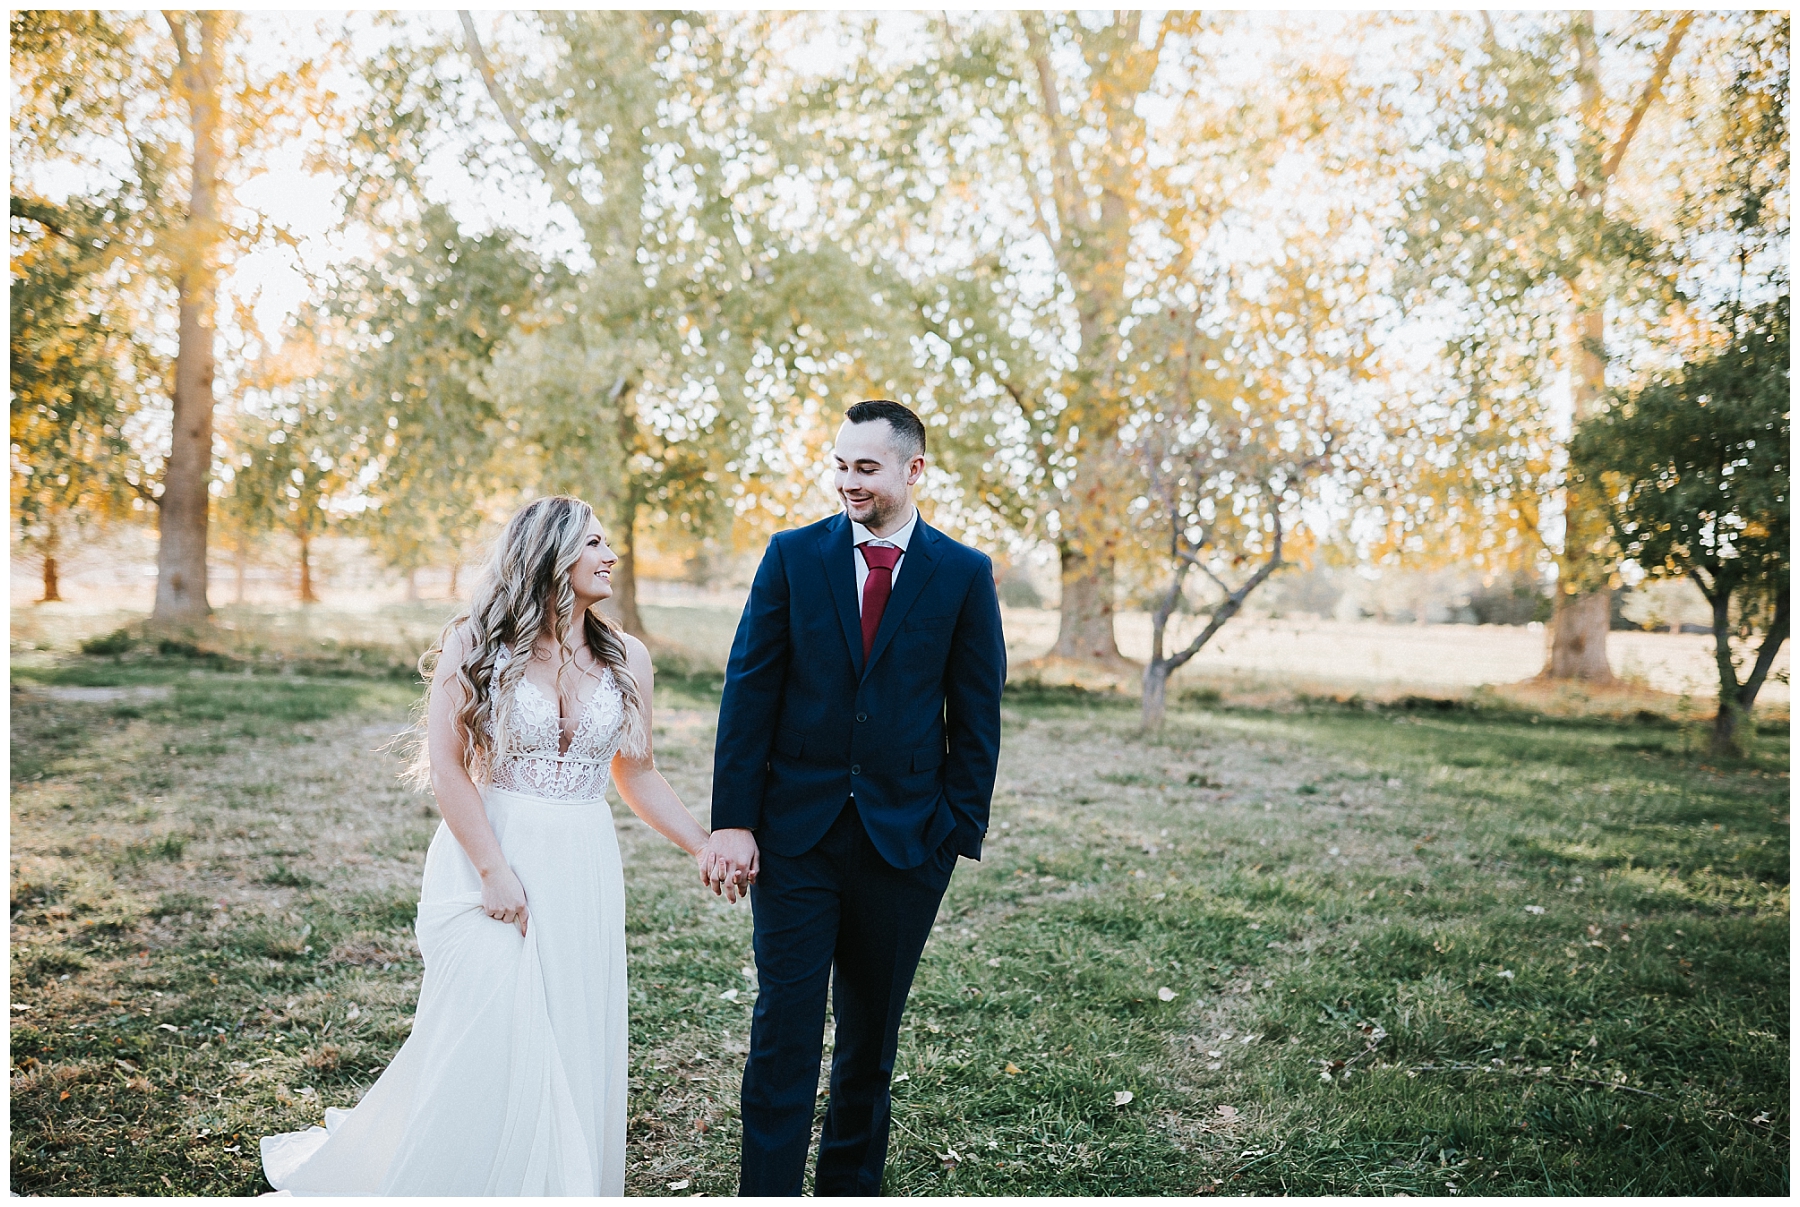 boho-bride-and-groom-twin-falls-idaho-wedding-photographer-finch-film-and-photo-fall-bridals-walking-hand-and-hand-facing-each-other